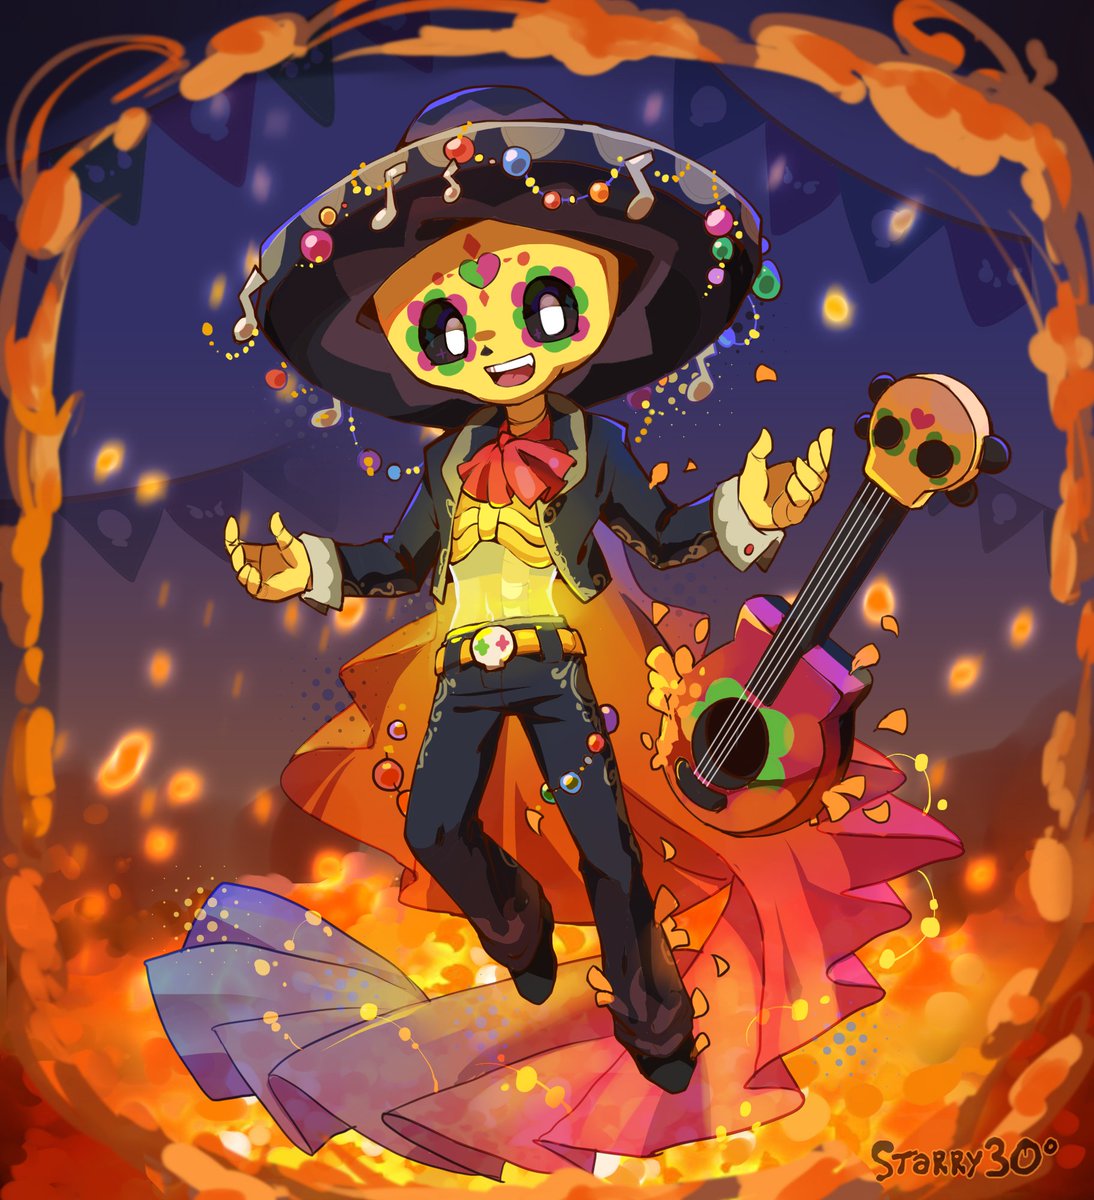 Frank Fs7n On Twitter More Amazing Work From Starry Zitong Featuring Poco El Primo And Calavera Piper With Some Intense Colors Brawlstars Fanart Https T Co Yj6h2lguns - el primo poco brawl stars